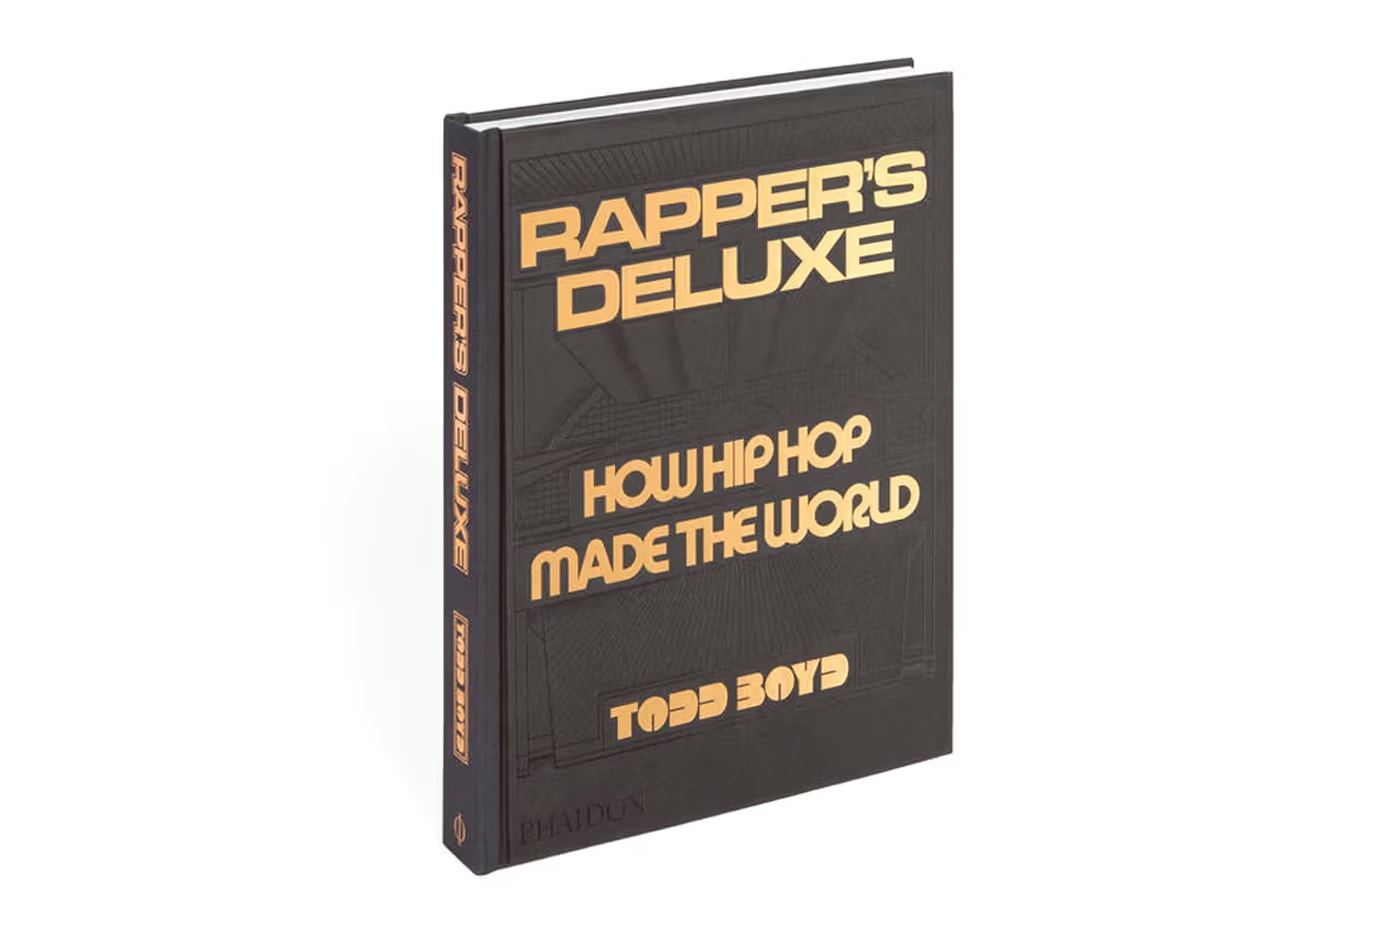 Phaidon Unveils 'Rapper's Deluxe: How Hip Hop Made The World' Rapper's Deluxe: How Hip Hop Made The World, written by Dr. Todd Boyd – a.k.a. The Notorious PhD price images coffee table book link price website store